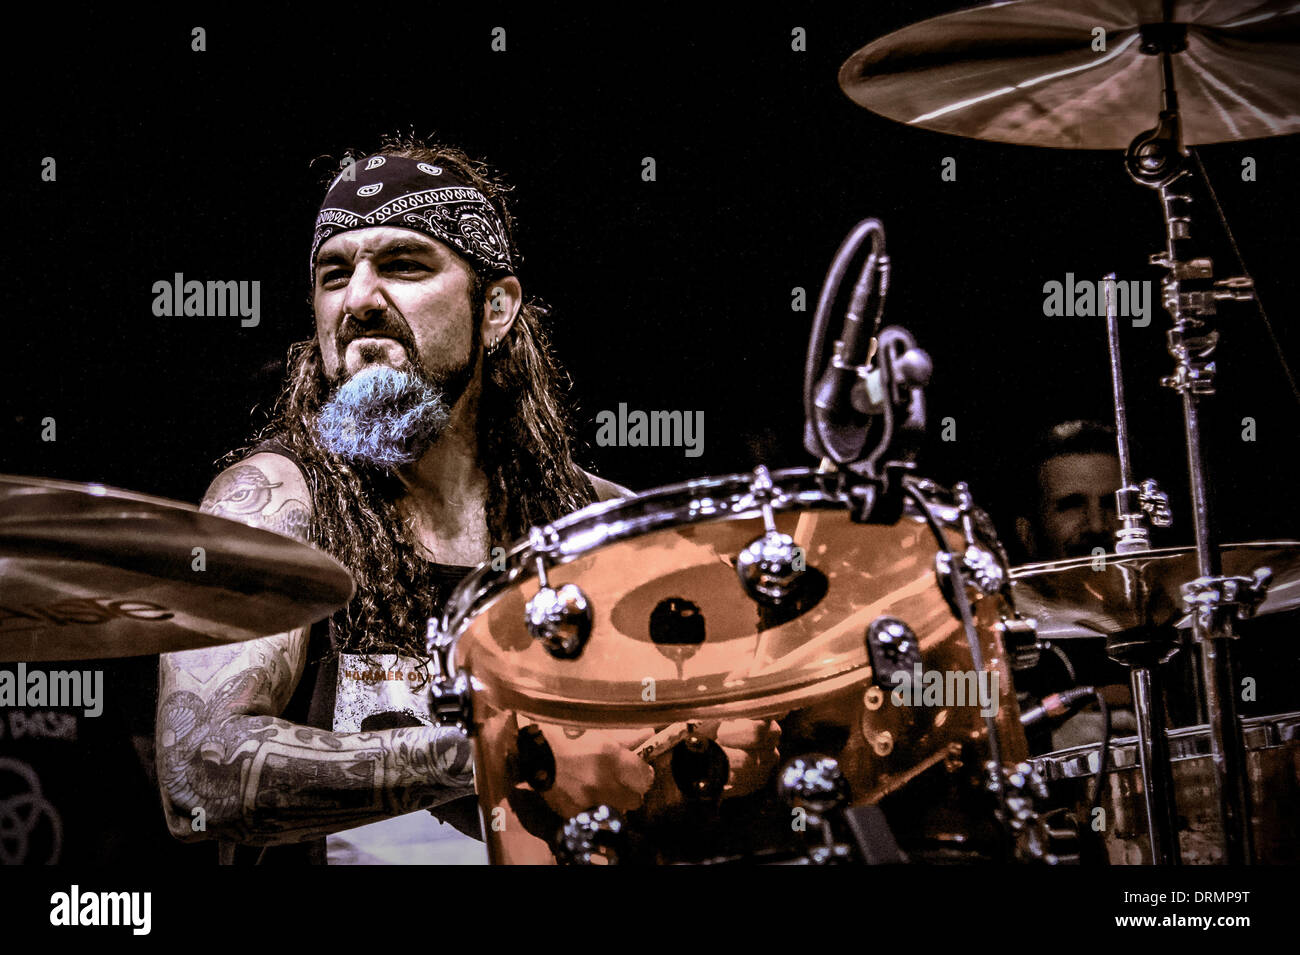 Toronto, Ontario, Canada. 24th Jan, 2014. MIKE PORTNOY. The Bonzo Bash, it is the ultimate celebration for the ultimate drummer, John Henry Bonham of Led Zeppelin. It is presented by Natal and Marshall and is a night filled with amazing drummers playing their favorite Led Zeppelin song. It is a complete evening of Led Zeppelin jams and this year was a crazy one! It was be hosted by Mike Portnoy, Carmine Appice and the show creator, Brian Tichy at The Observatory club in Santa Ana, CA. © Igor Vidyashev/ZUMAPRESS.com/Alamy Live News Stock Photo